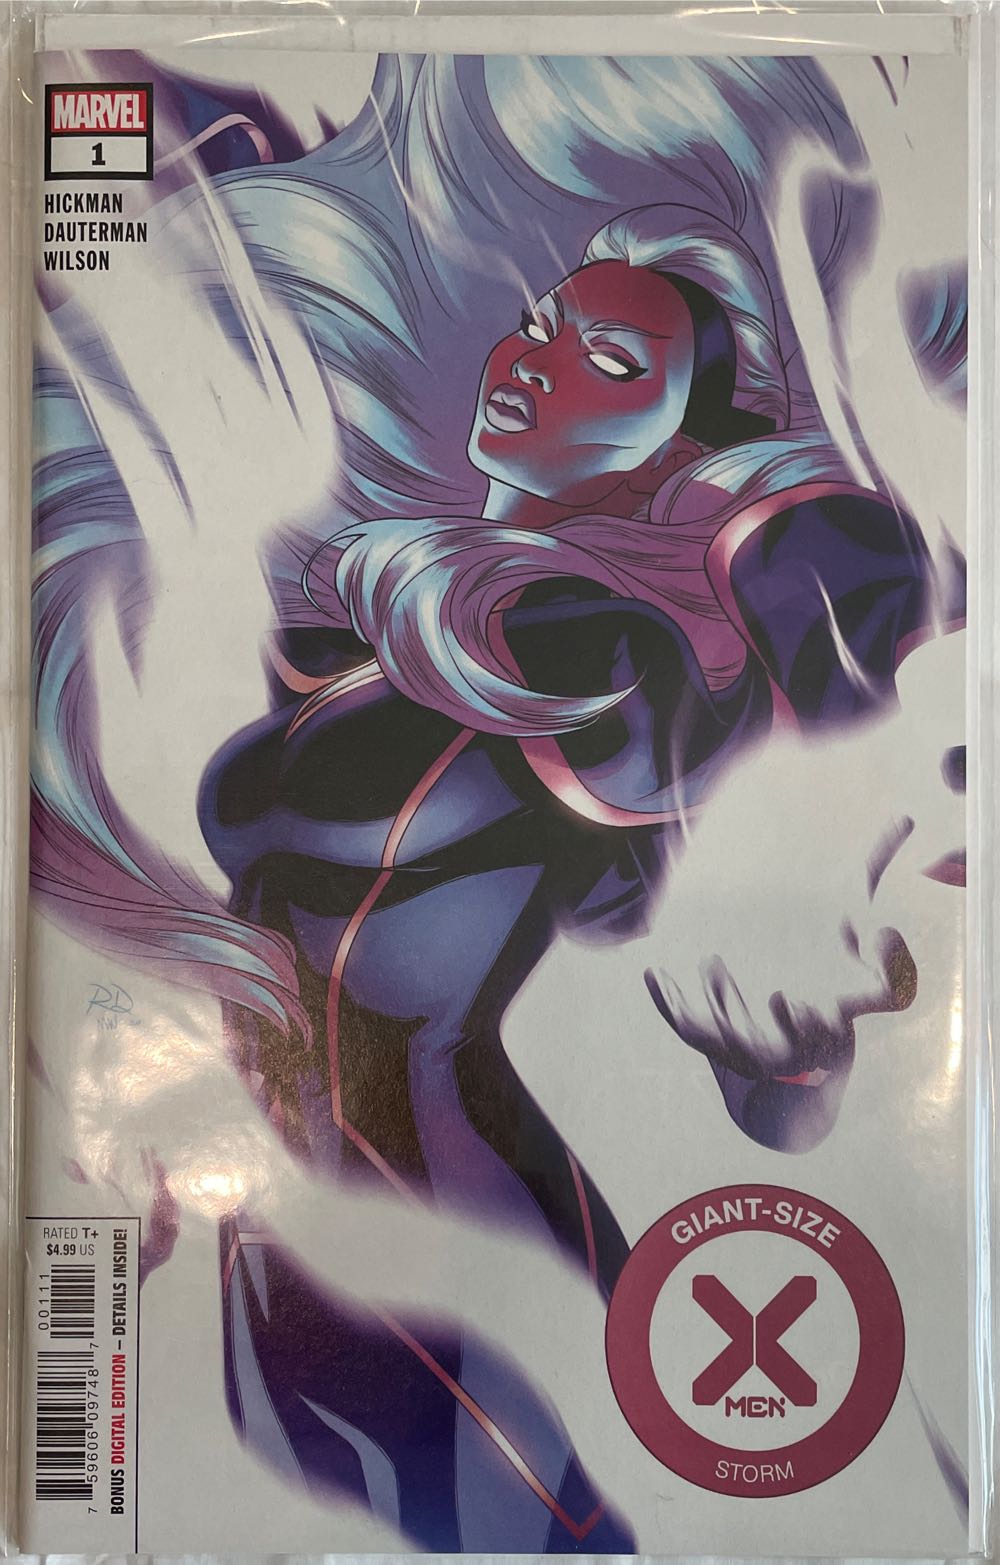 Giant-Size X-Men: Storm - Marvel (1 - Nov 2020) comic book collectible [Barcode 75960609748700111] - Main Image 2